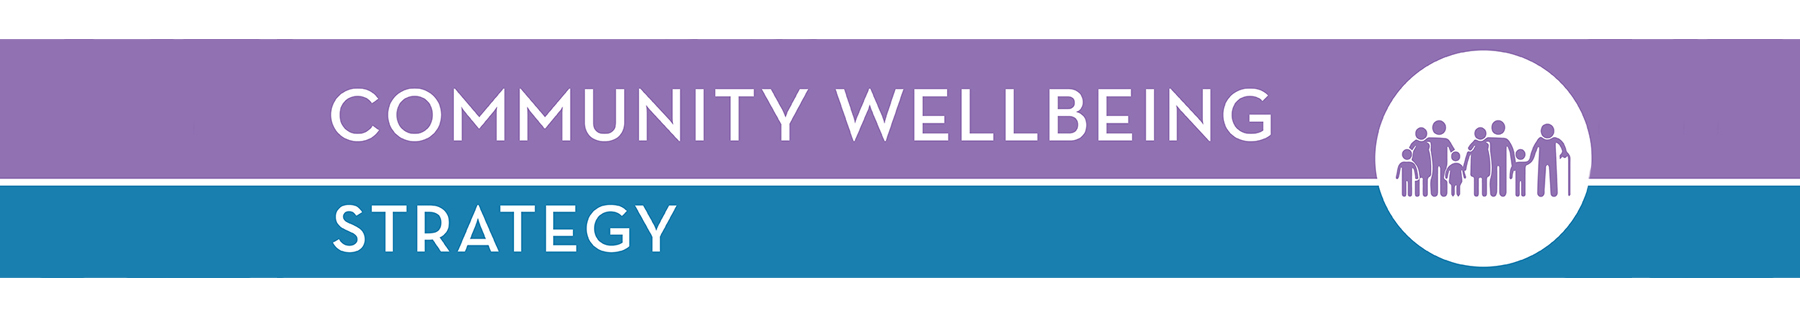 Community Wellbeing Strategy